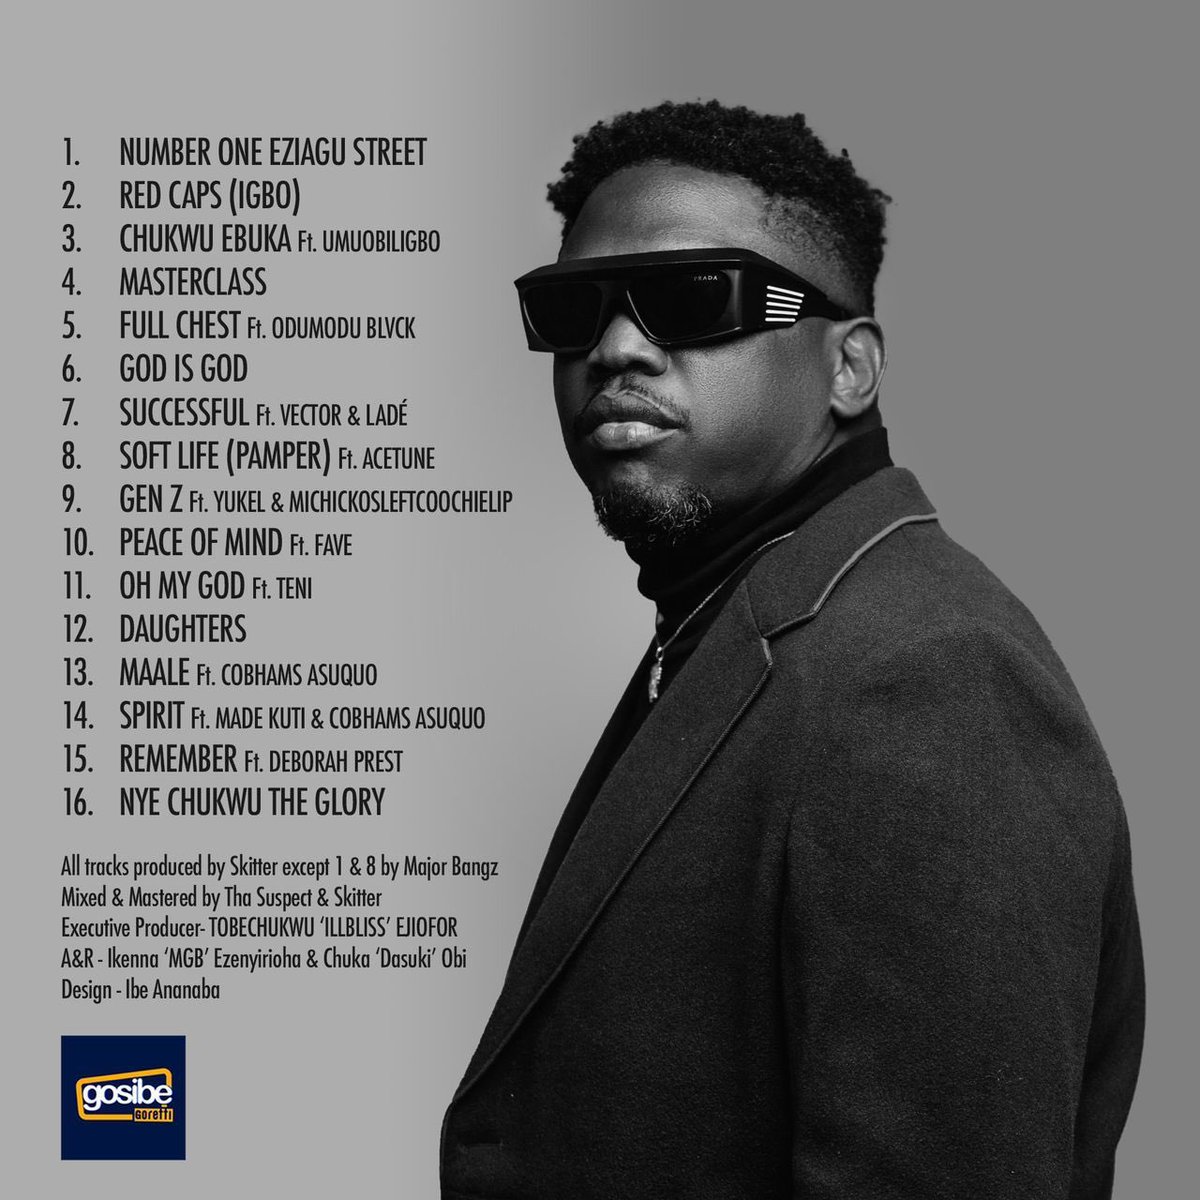 So here is my review on 'Sideh Kai' by @illBlissGoretti.

Kindly RT🙏

For those who don't know, his name is Illbliss, AKA, Ogaboss, Illigoretti, Illychapo, Dat Igbo Boy. He's one of the most consistent rappers in the industry.

Google Him!

He delivers a riveting journey through